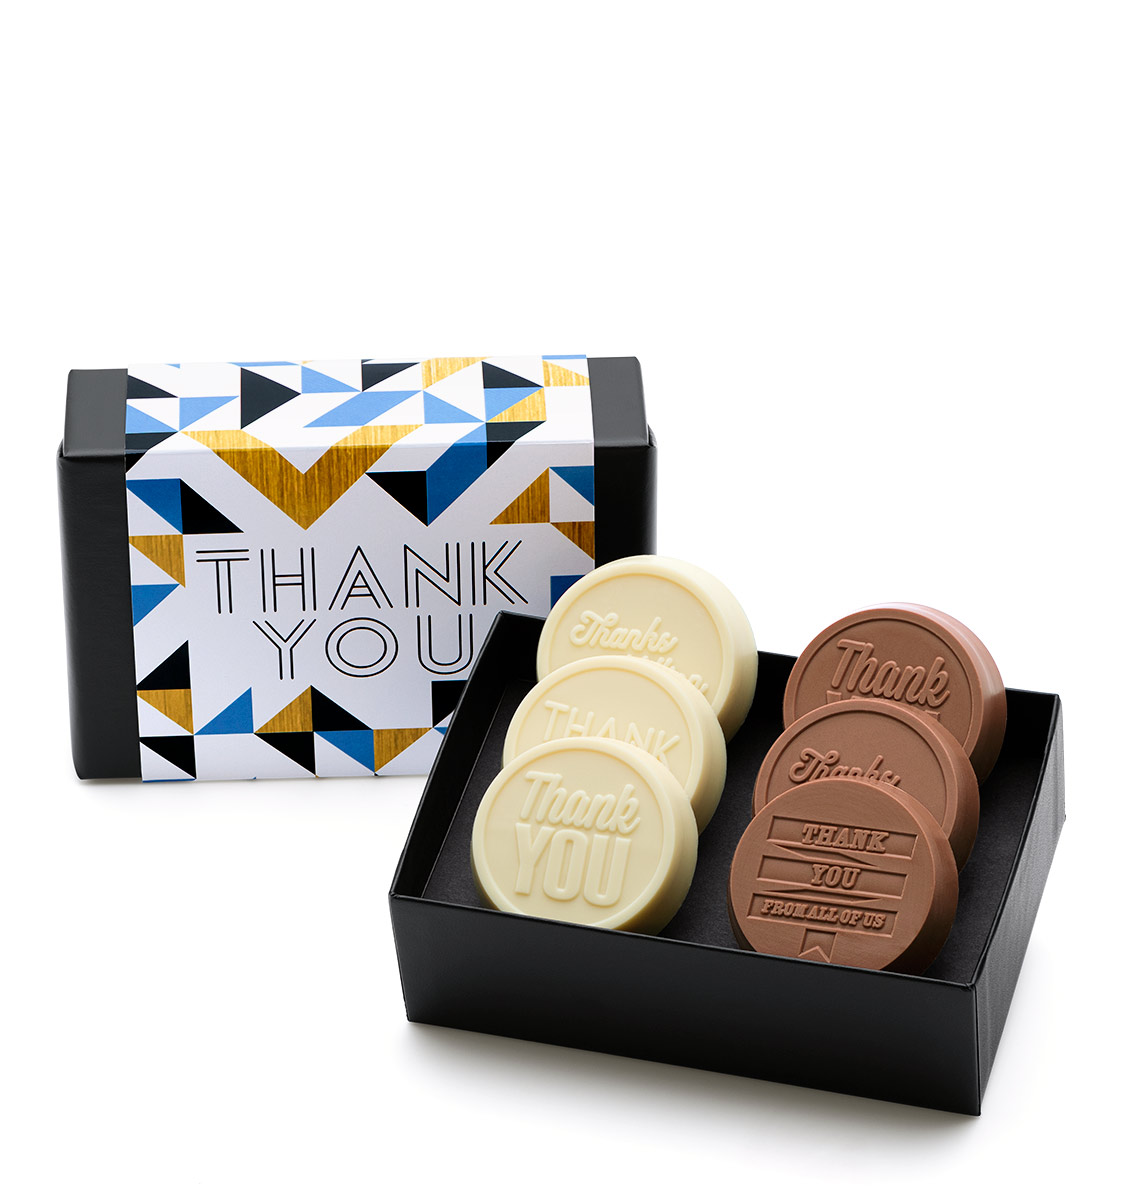 ready-gift-chocolate-SHX206004T-engraved-chocolate-oreos-thank-you